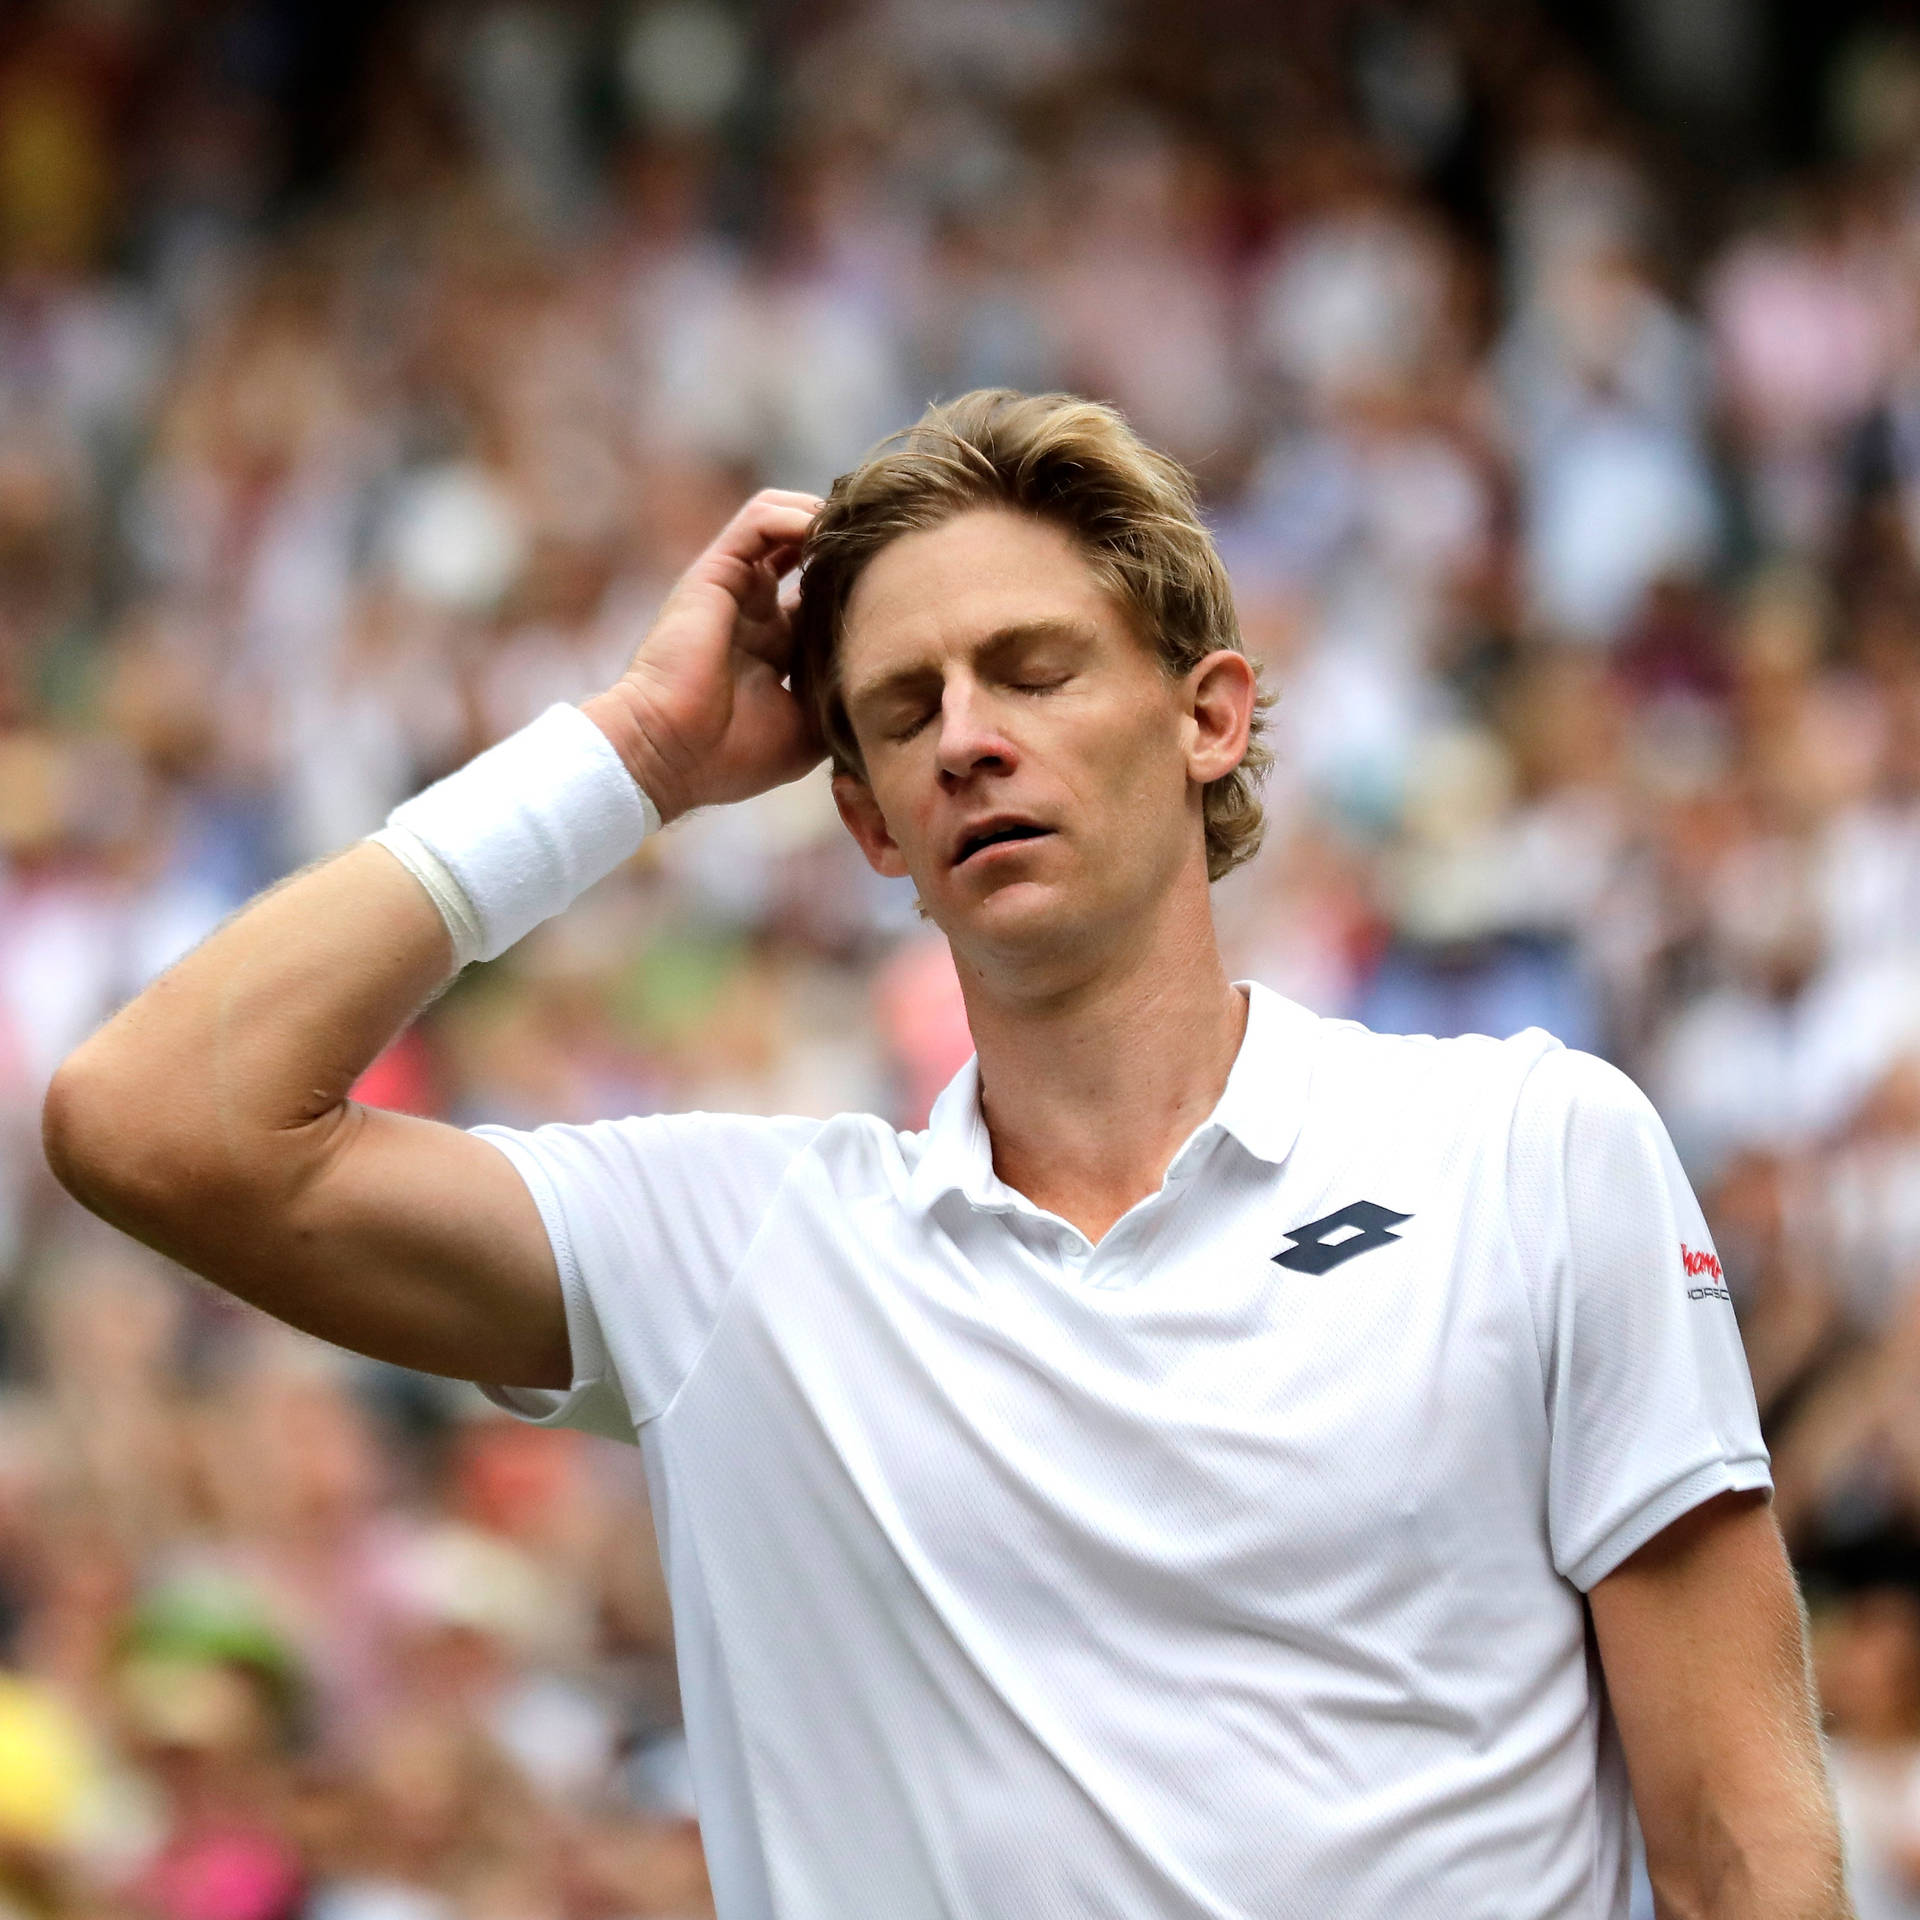 Caption: Intense Kevin Anderson with Eyes Closed in Thought Wallpaper